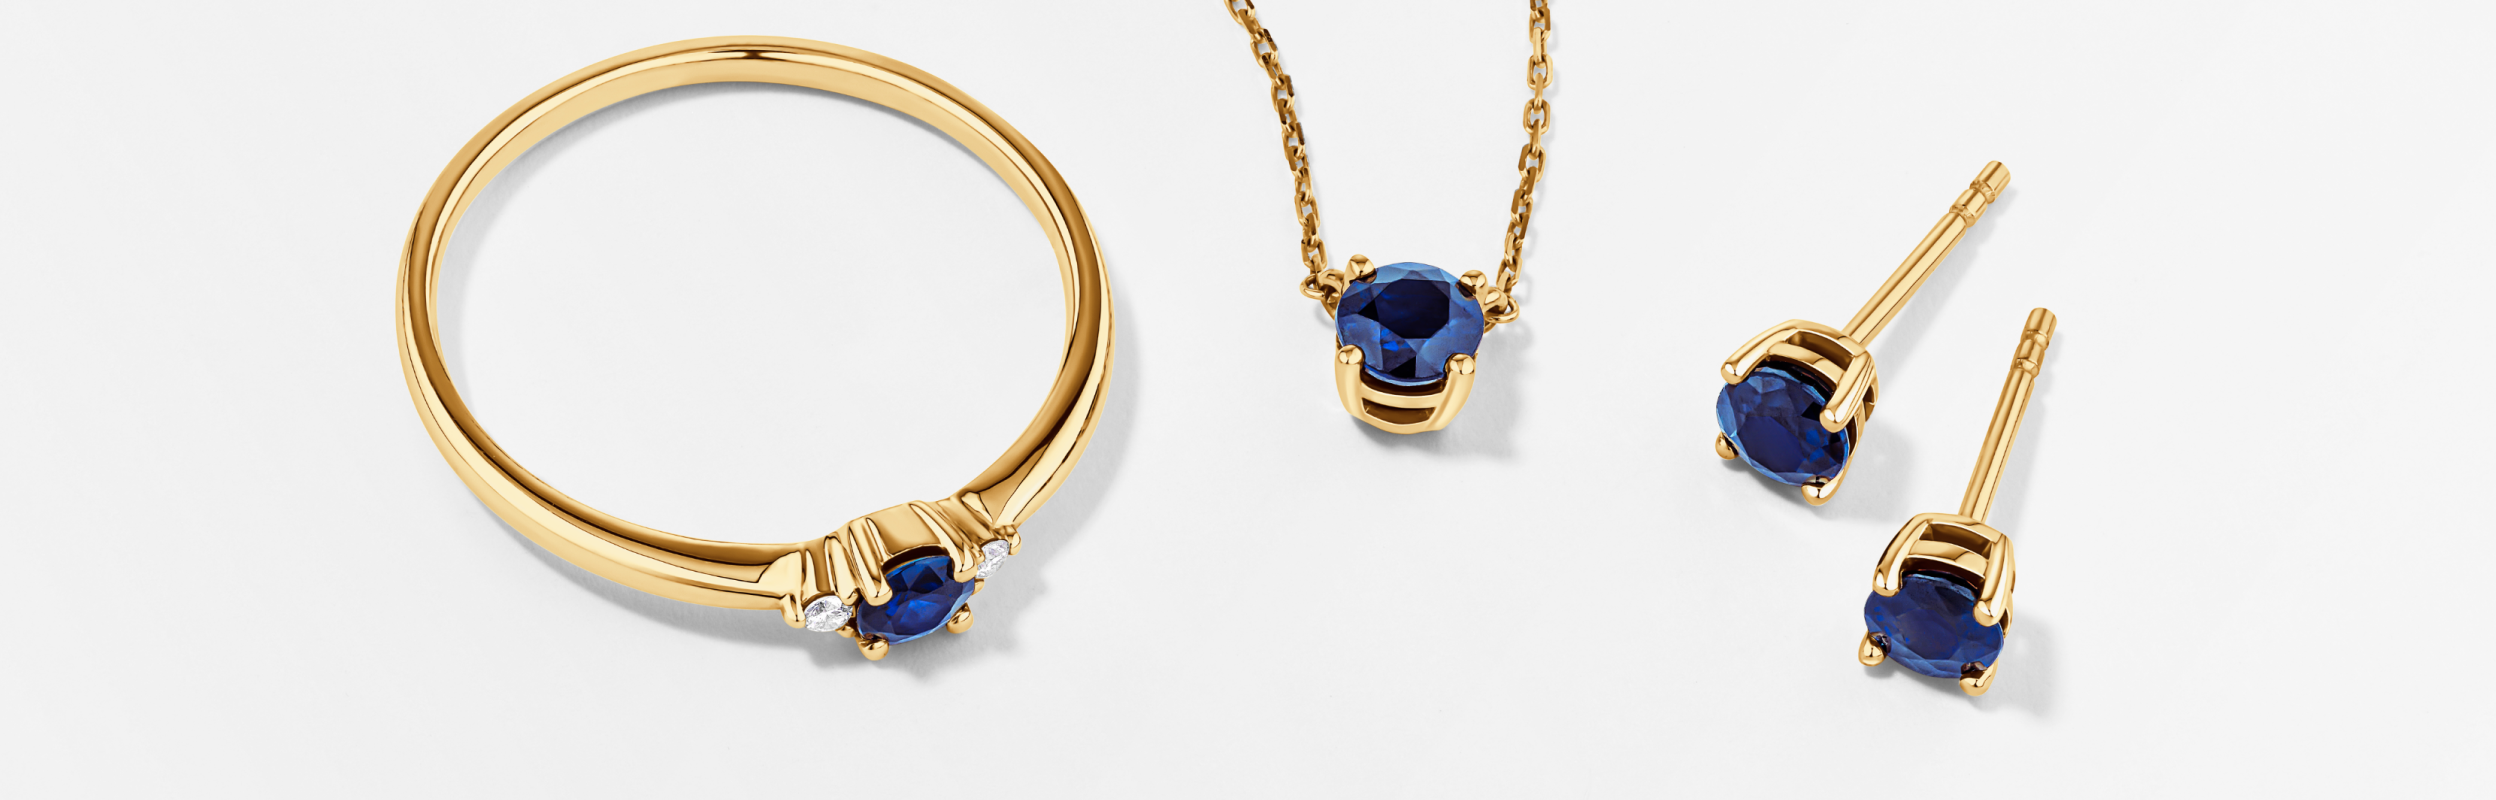 Sapphire jewellery, ring, necklace and earrings in yellow gold